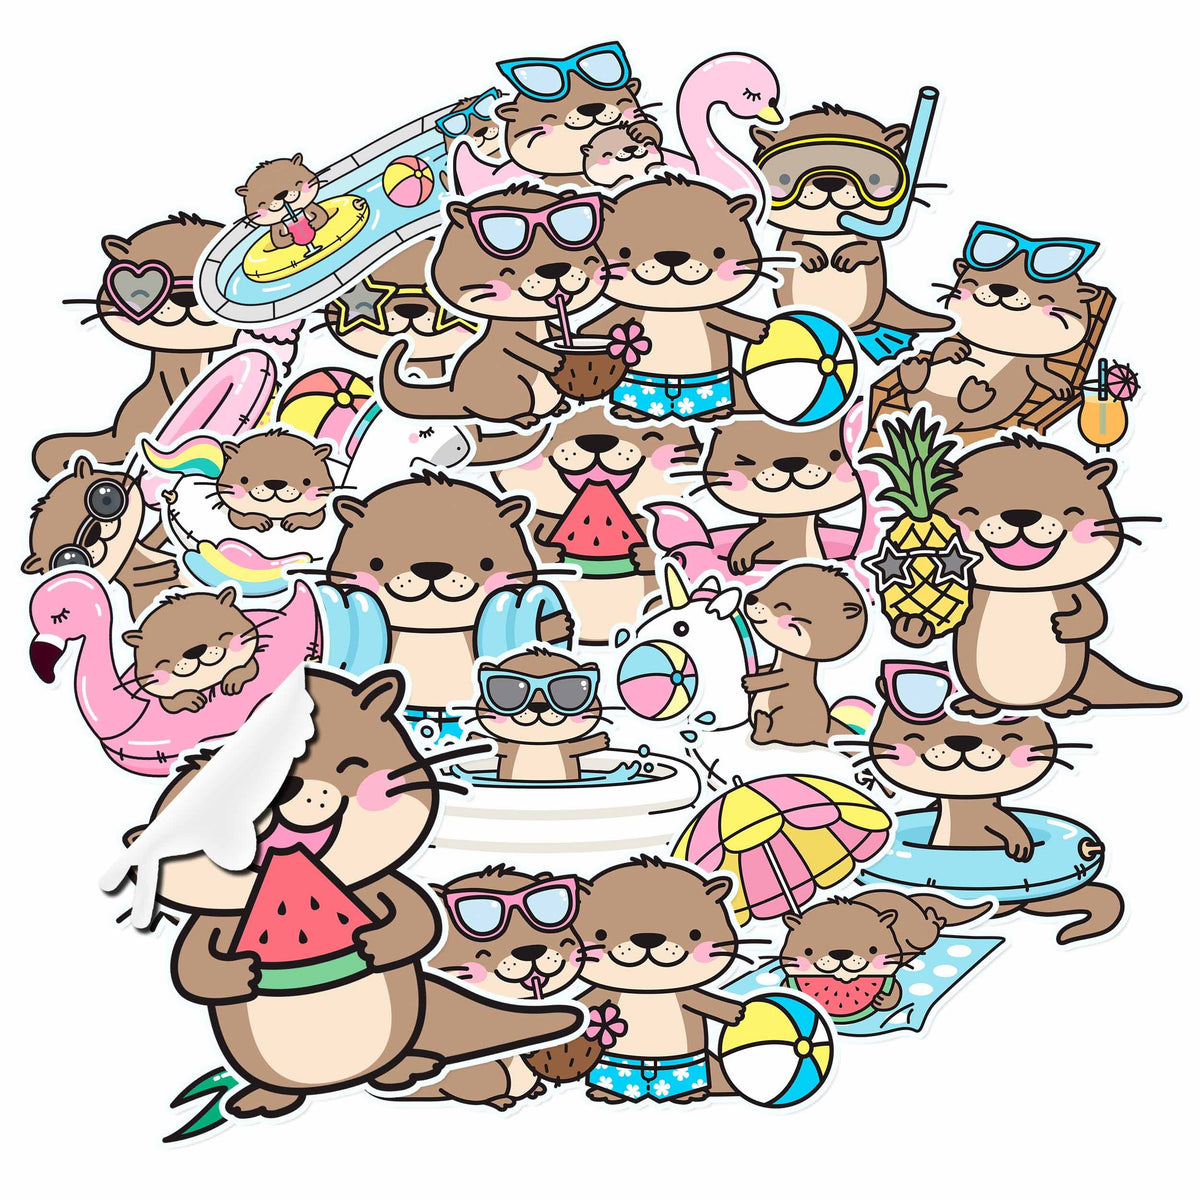 20 Pcs Summer Fun Otter Stickers - Brighten Up Your Items with Playful Otter Charm!